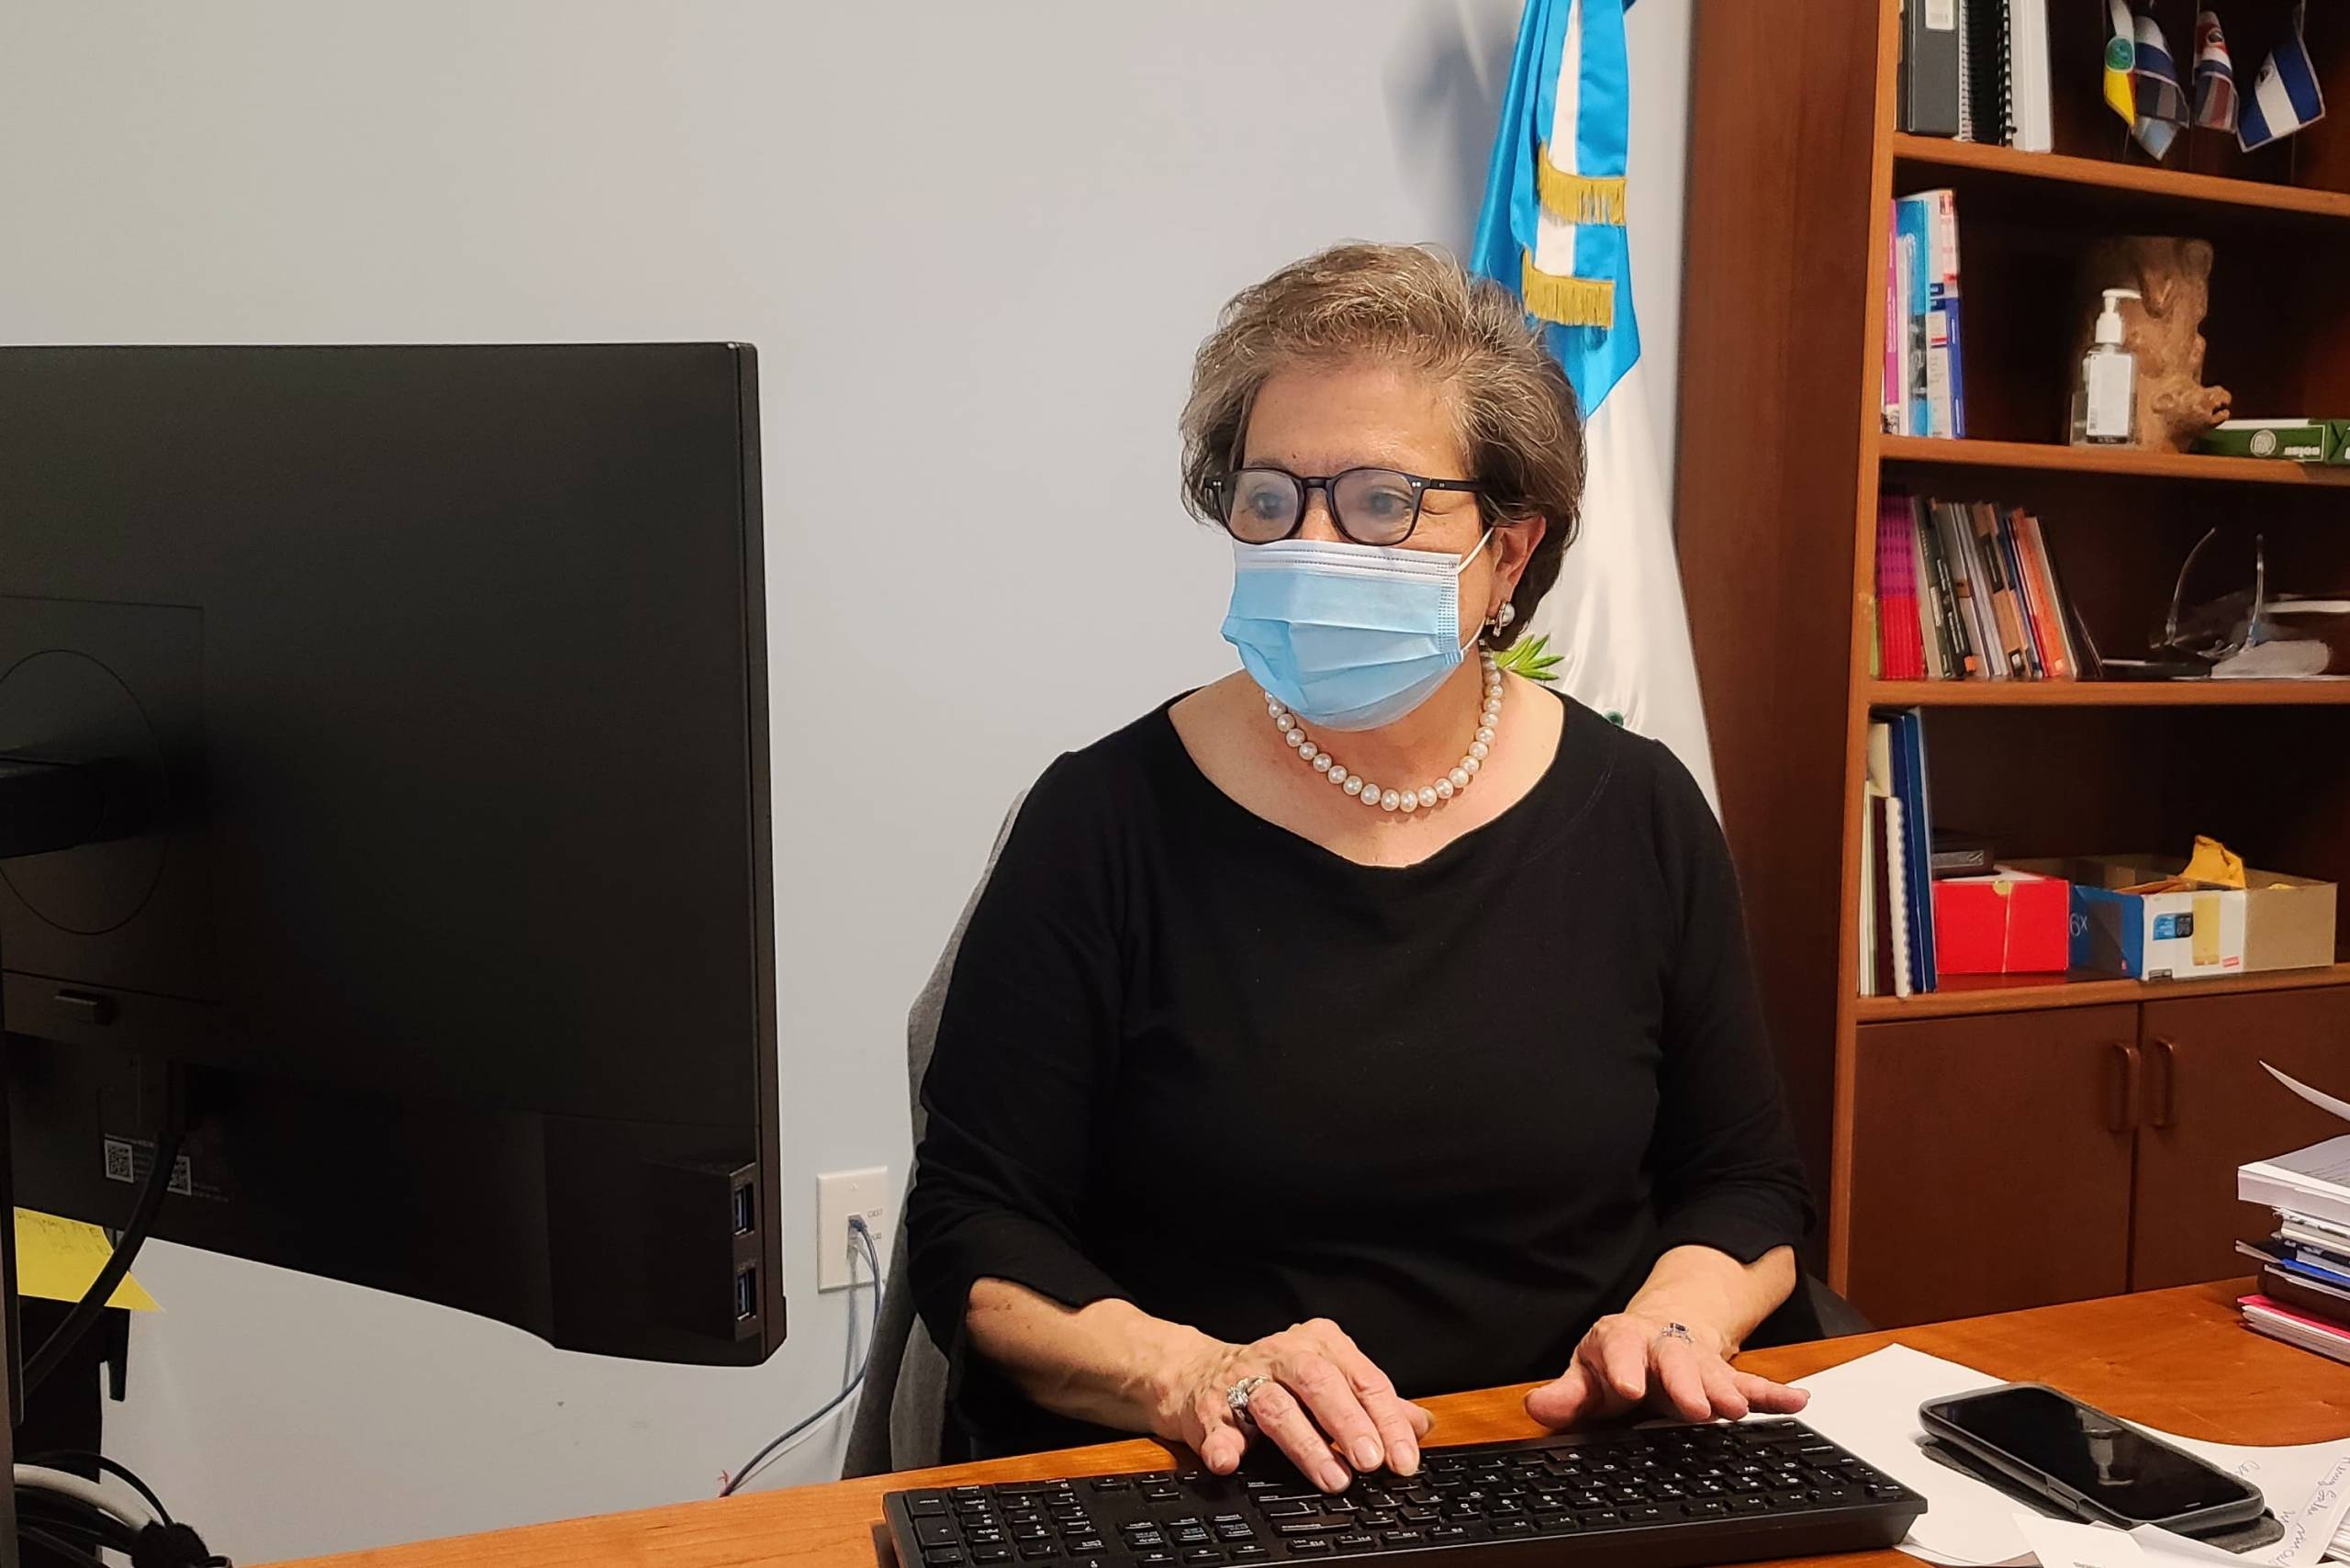 Sylvia Wohlers Gomar de Meie, the Guatemalan consul general in San Francisco, types on her computer in her office. She is wearing glasses and a blue facemask.